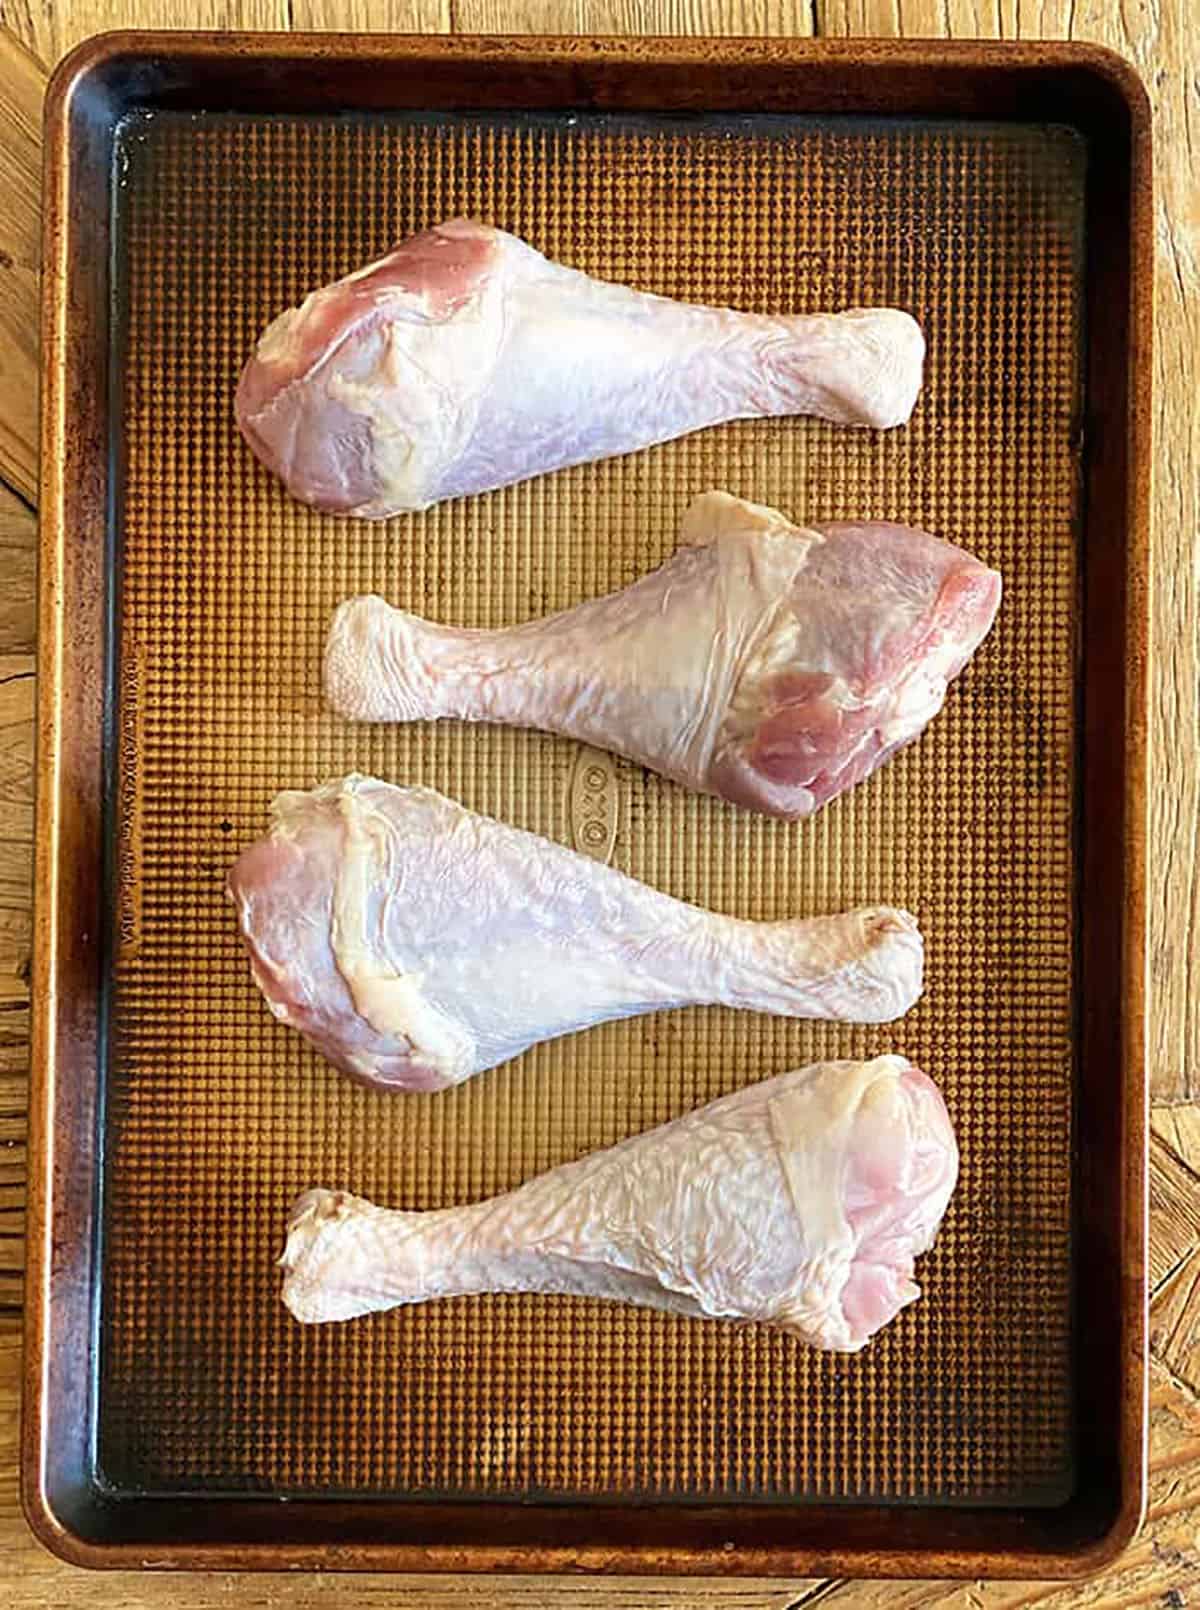 Four uncooked turkey legs are placed on a baking sheet.